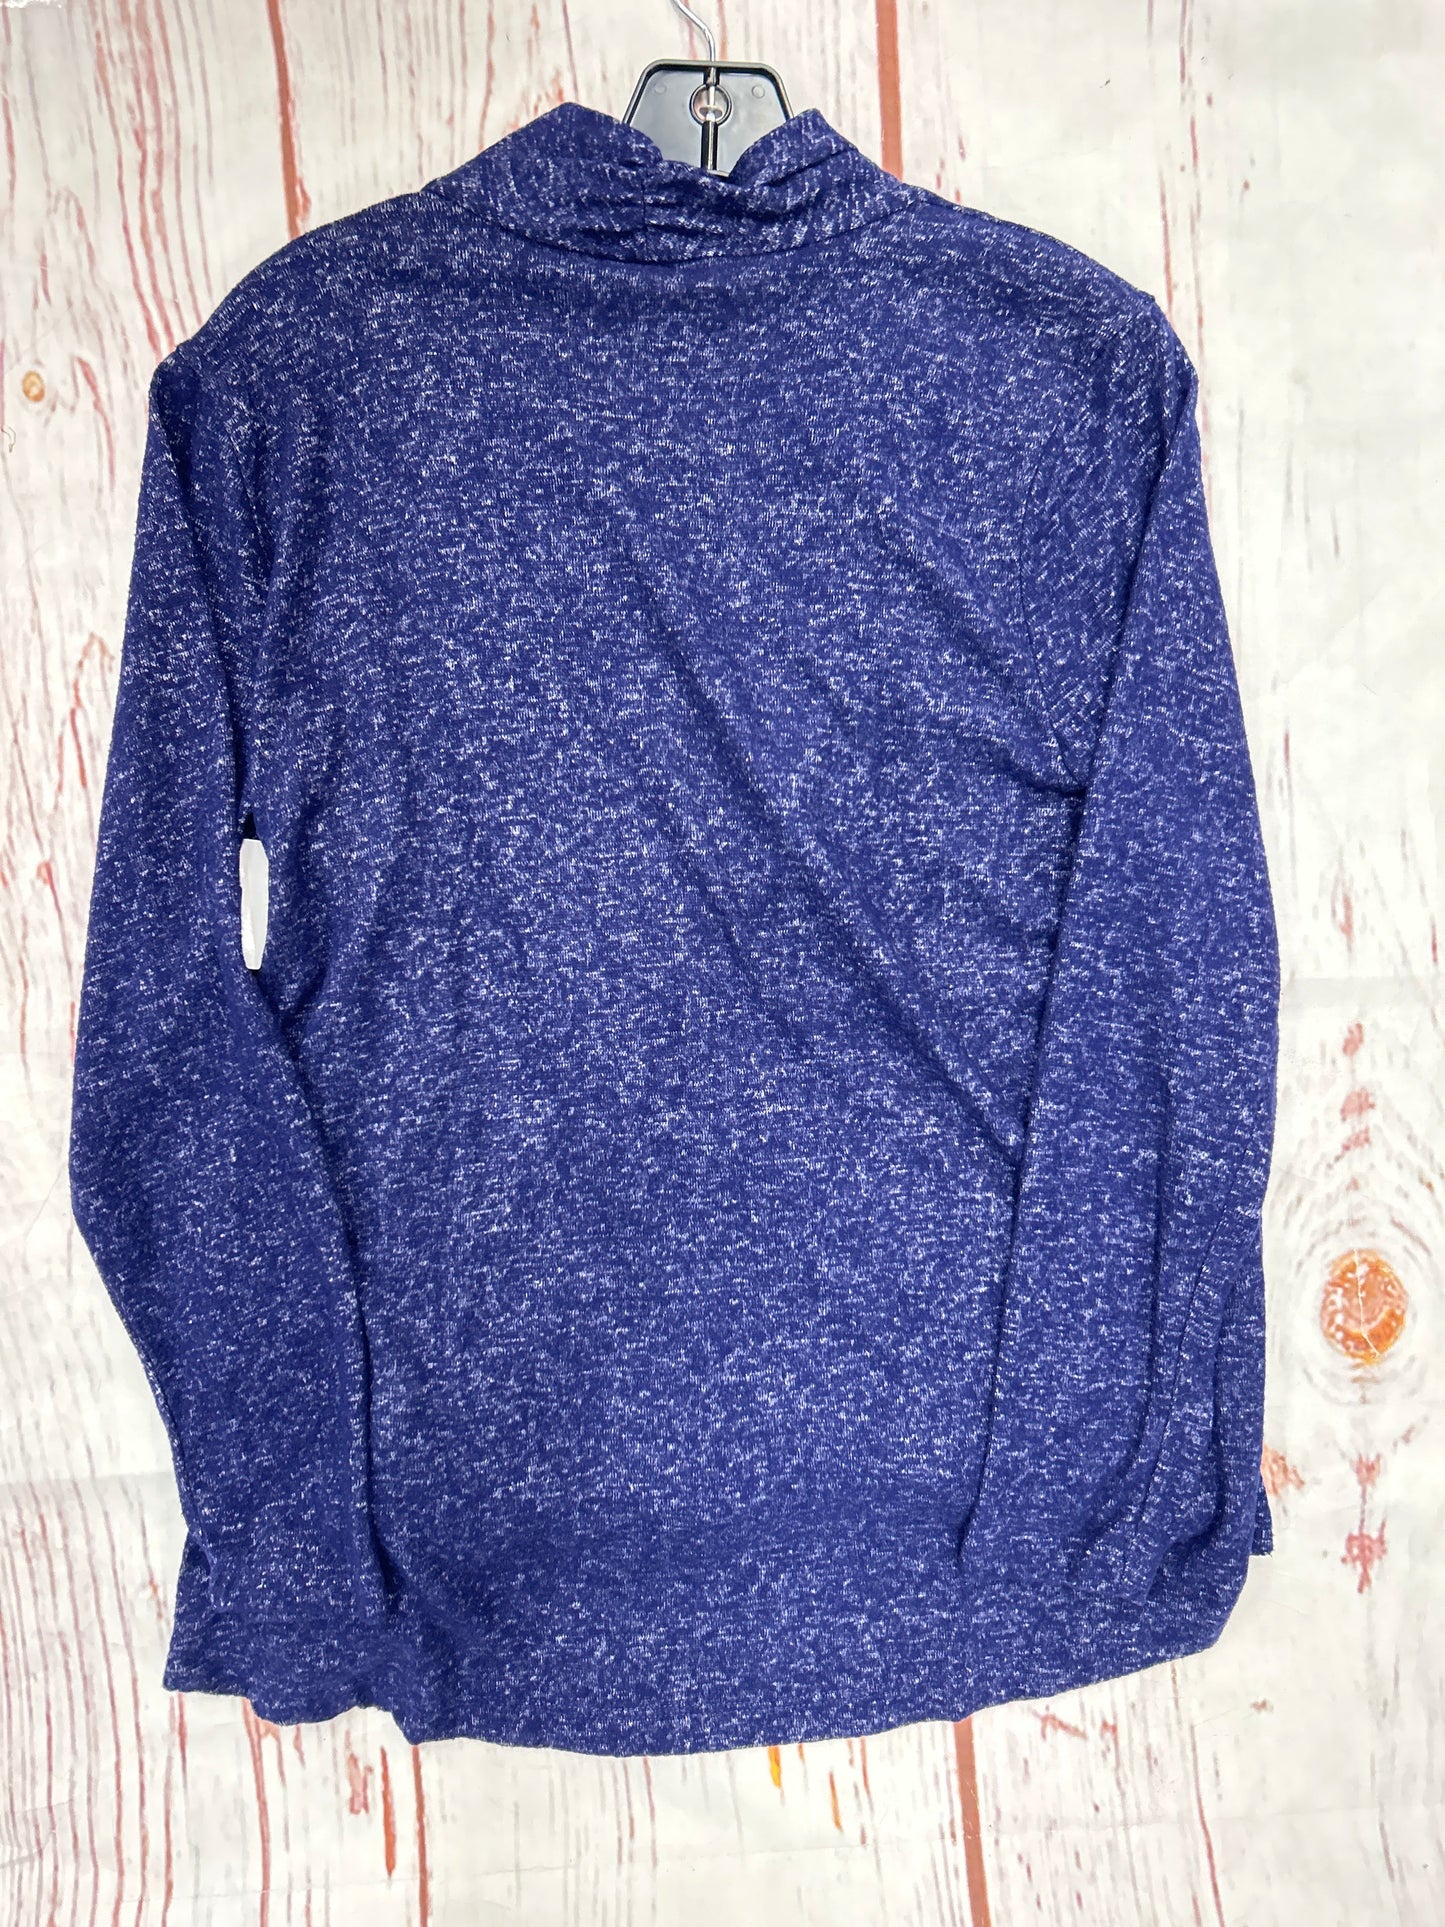 Sweater By Vintage America  Size: M